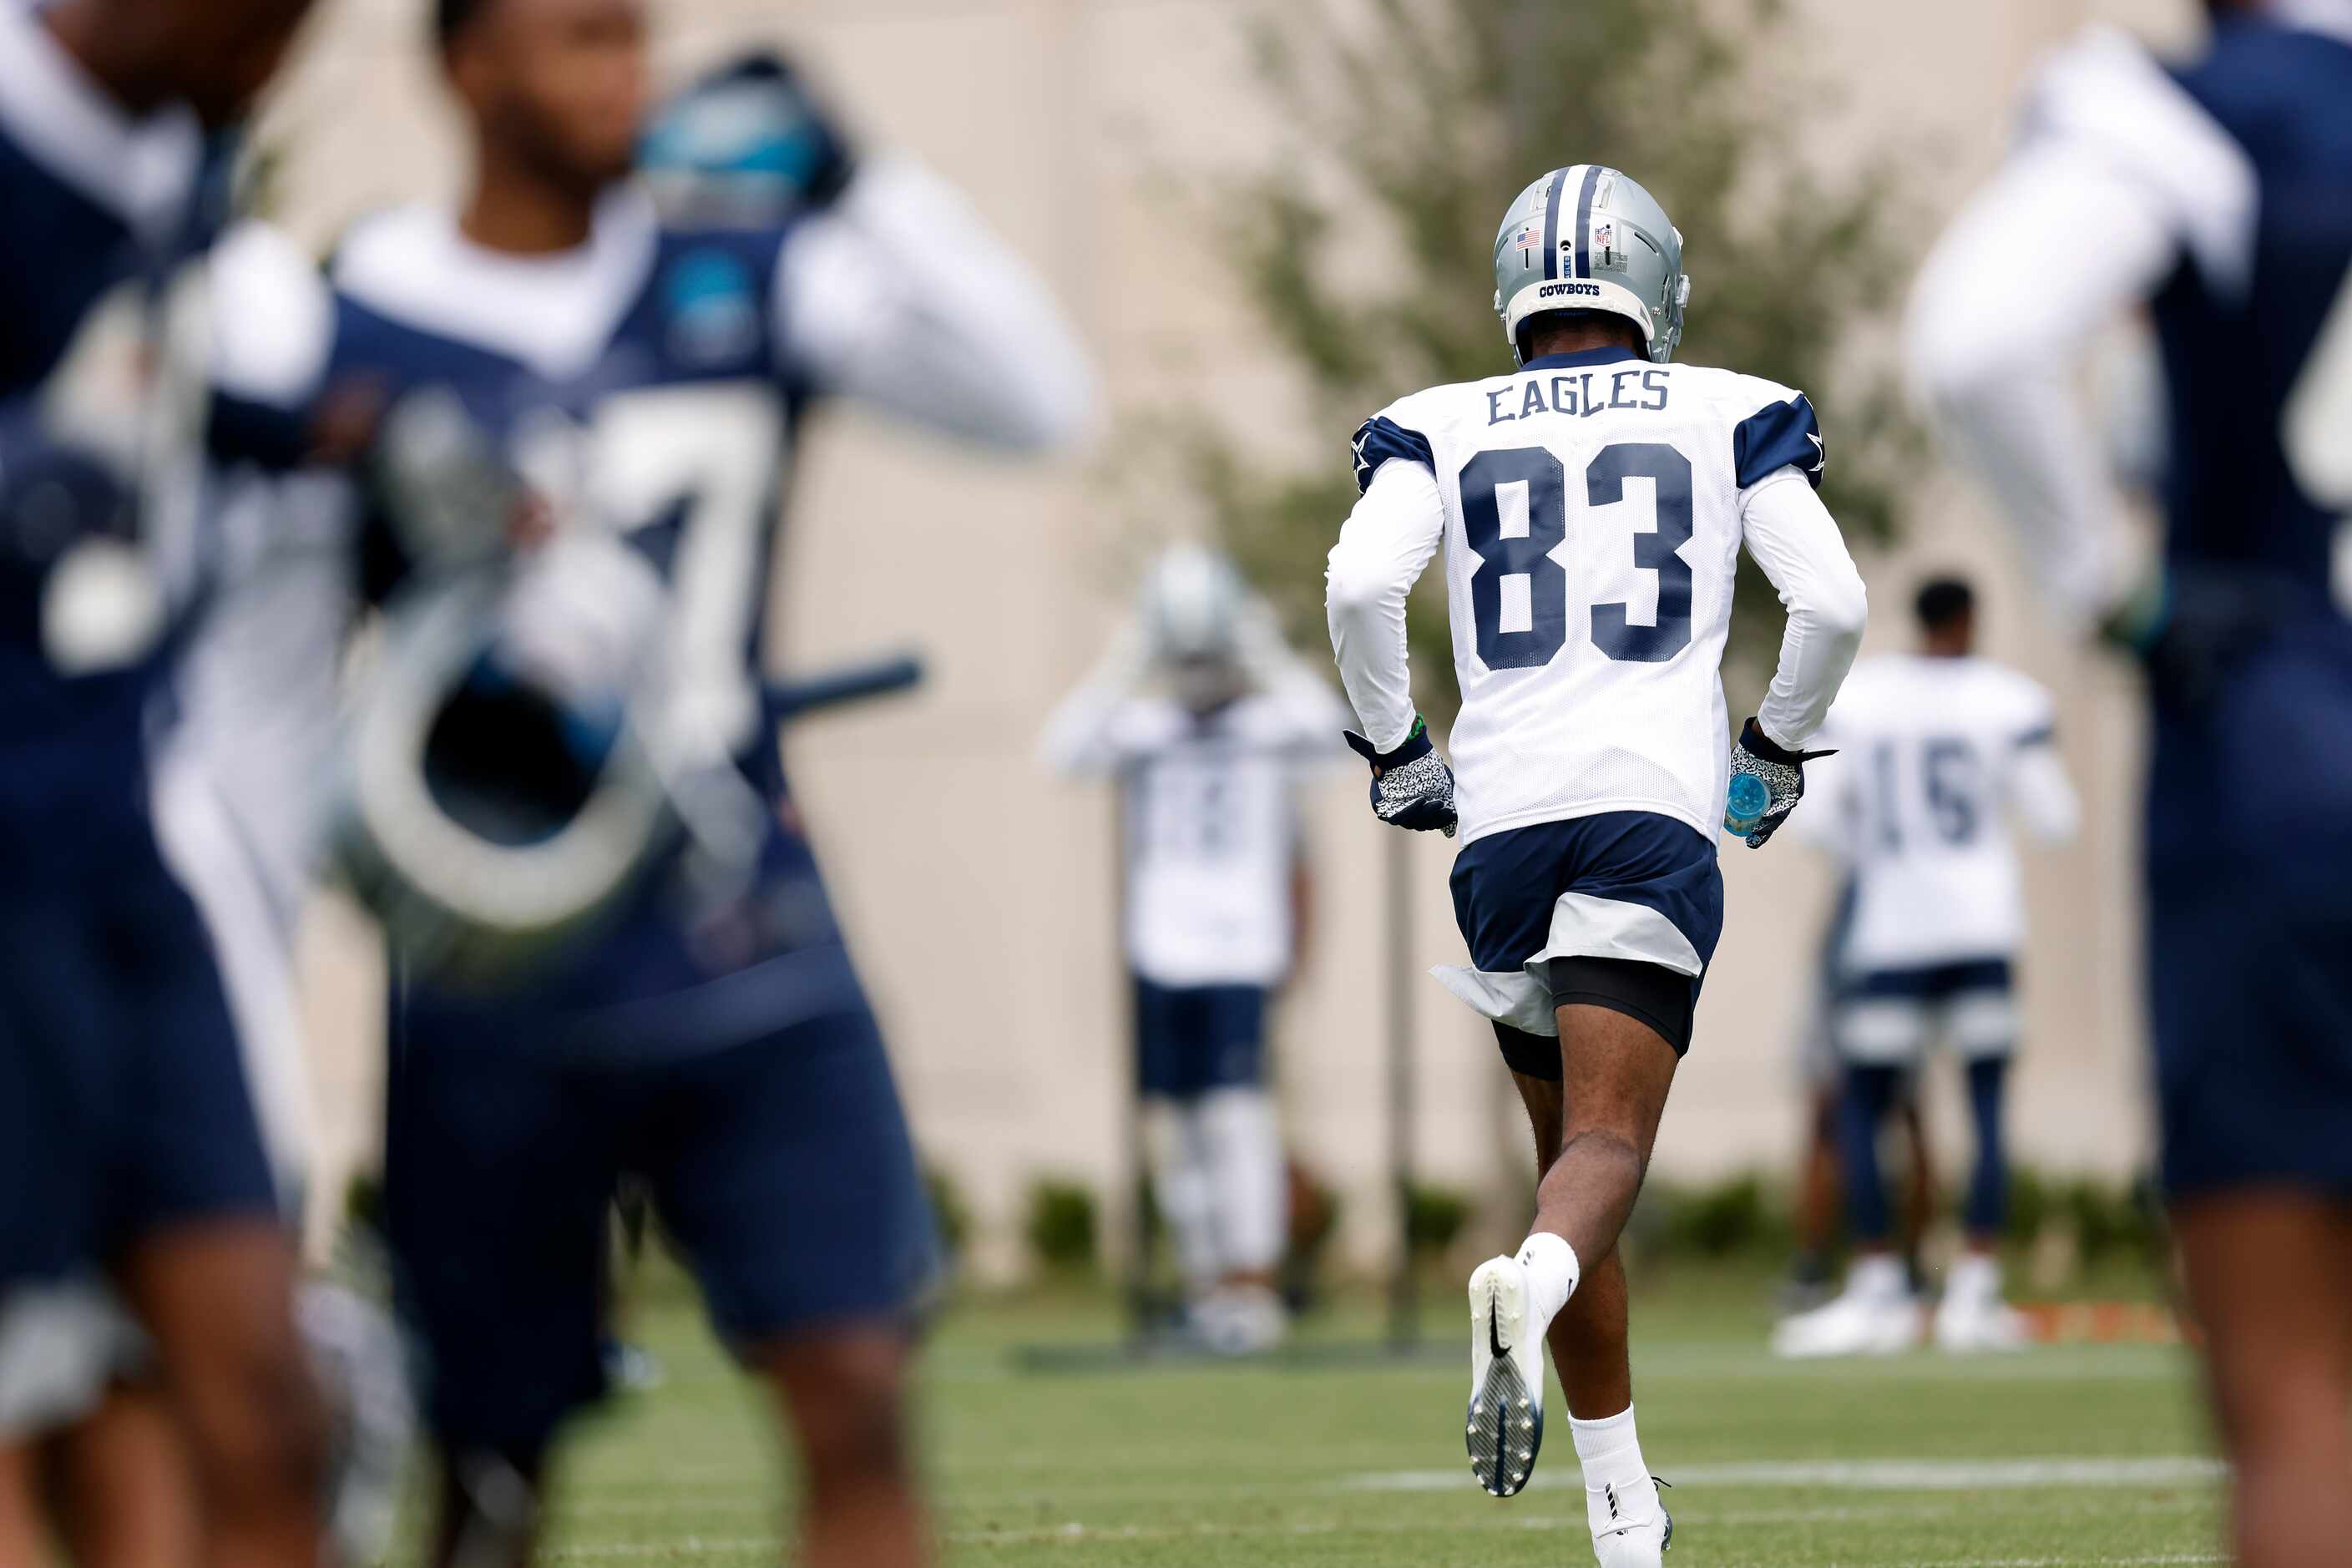 Eagles on a Dallas Cowboys jersey? Yes, that's rookie wide receiver Brennan Eagles (83)...